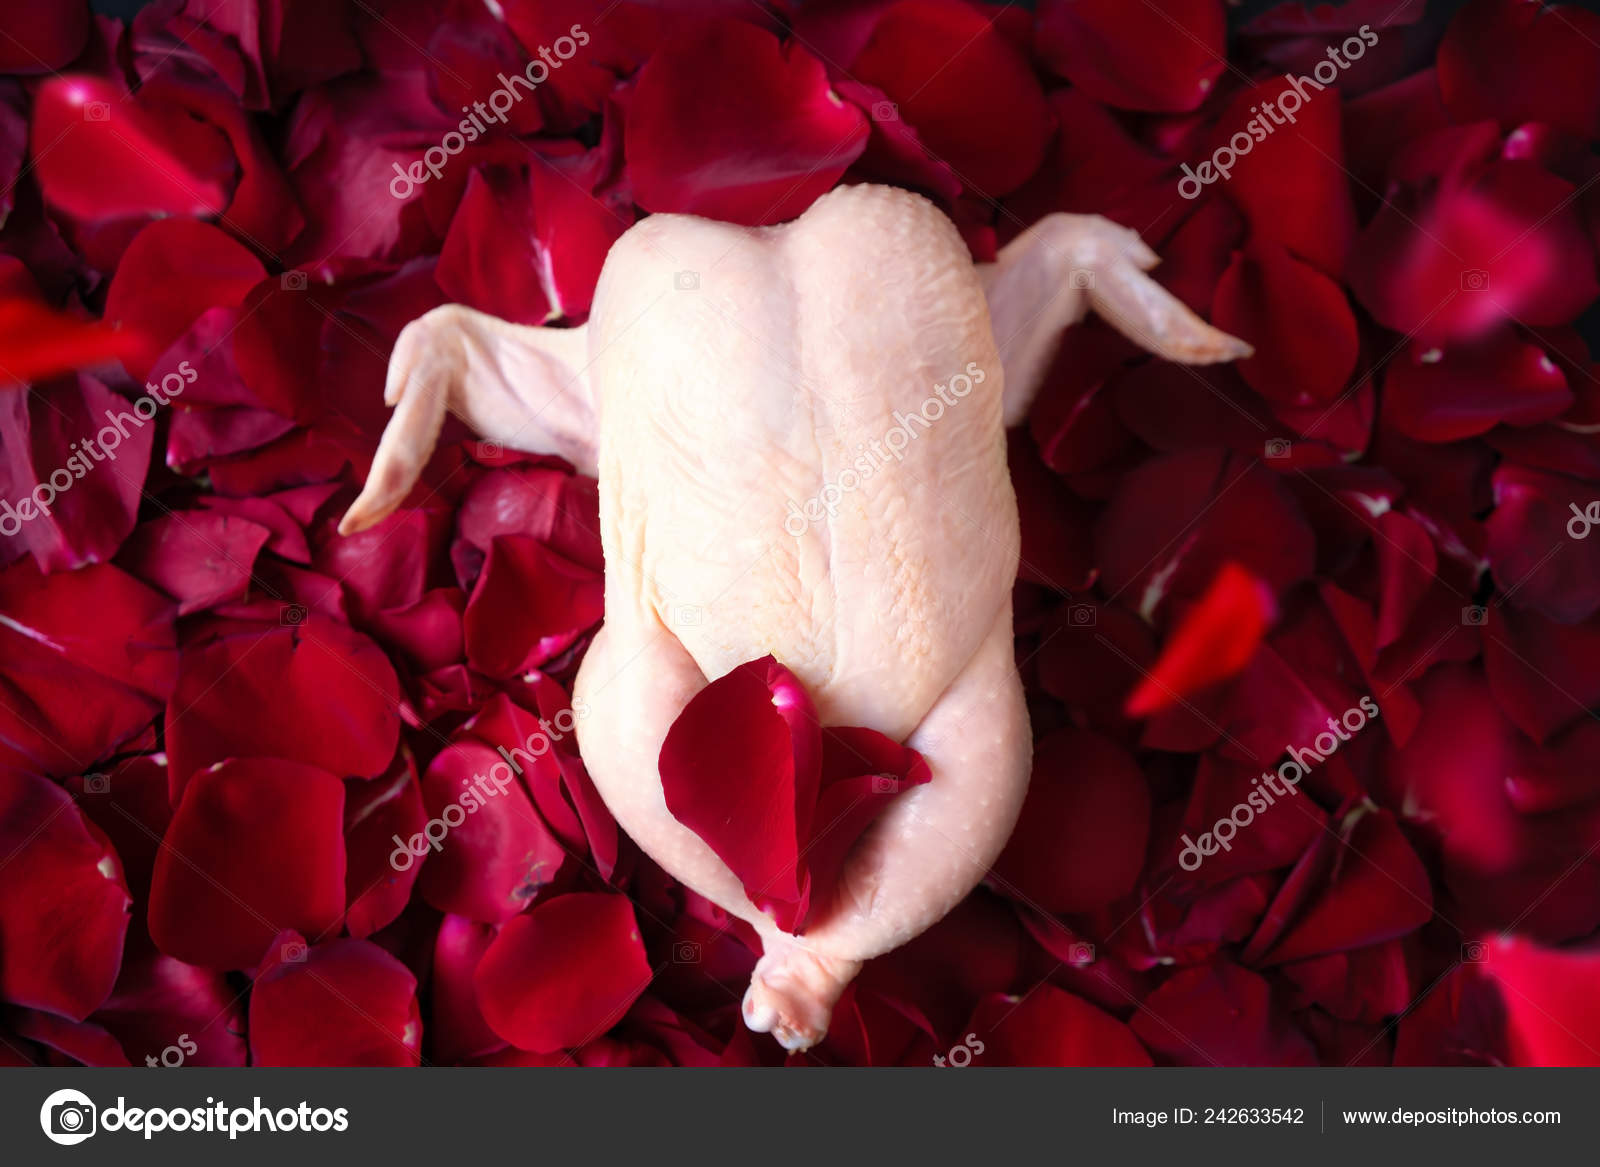 Funny Chicken Rose Petals Red Rose Petals Stock Photo Image By C Egrigorovich